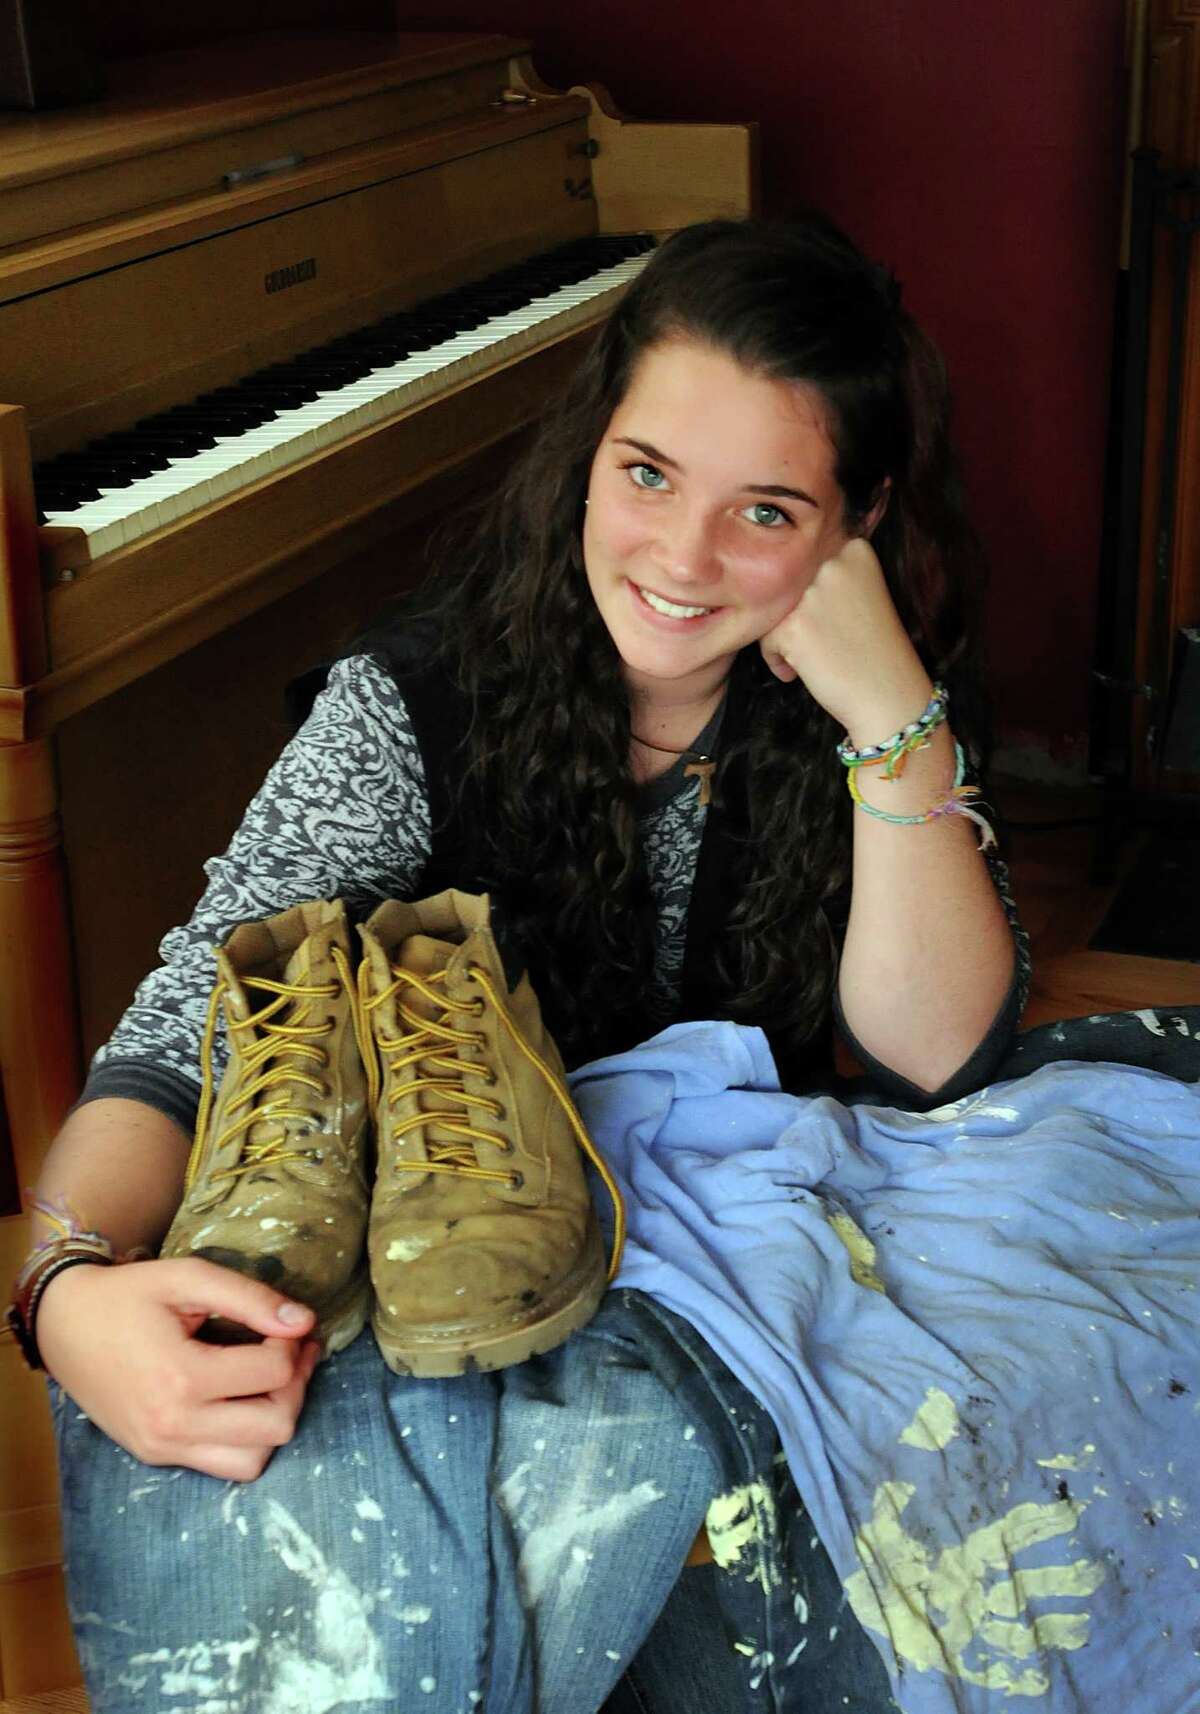 (ms082510)-Samantha Bowers, of Derby, with the clothes that she wore while volunteering in Kentucky. In the background is her piano. Melanie Stengel/Register